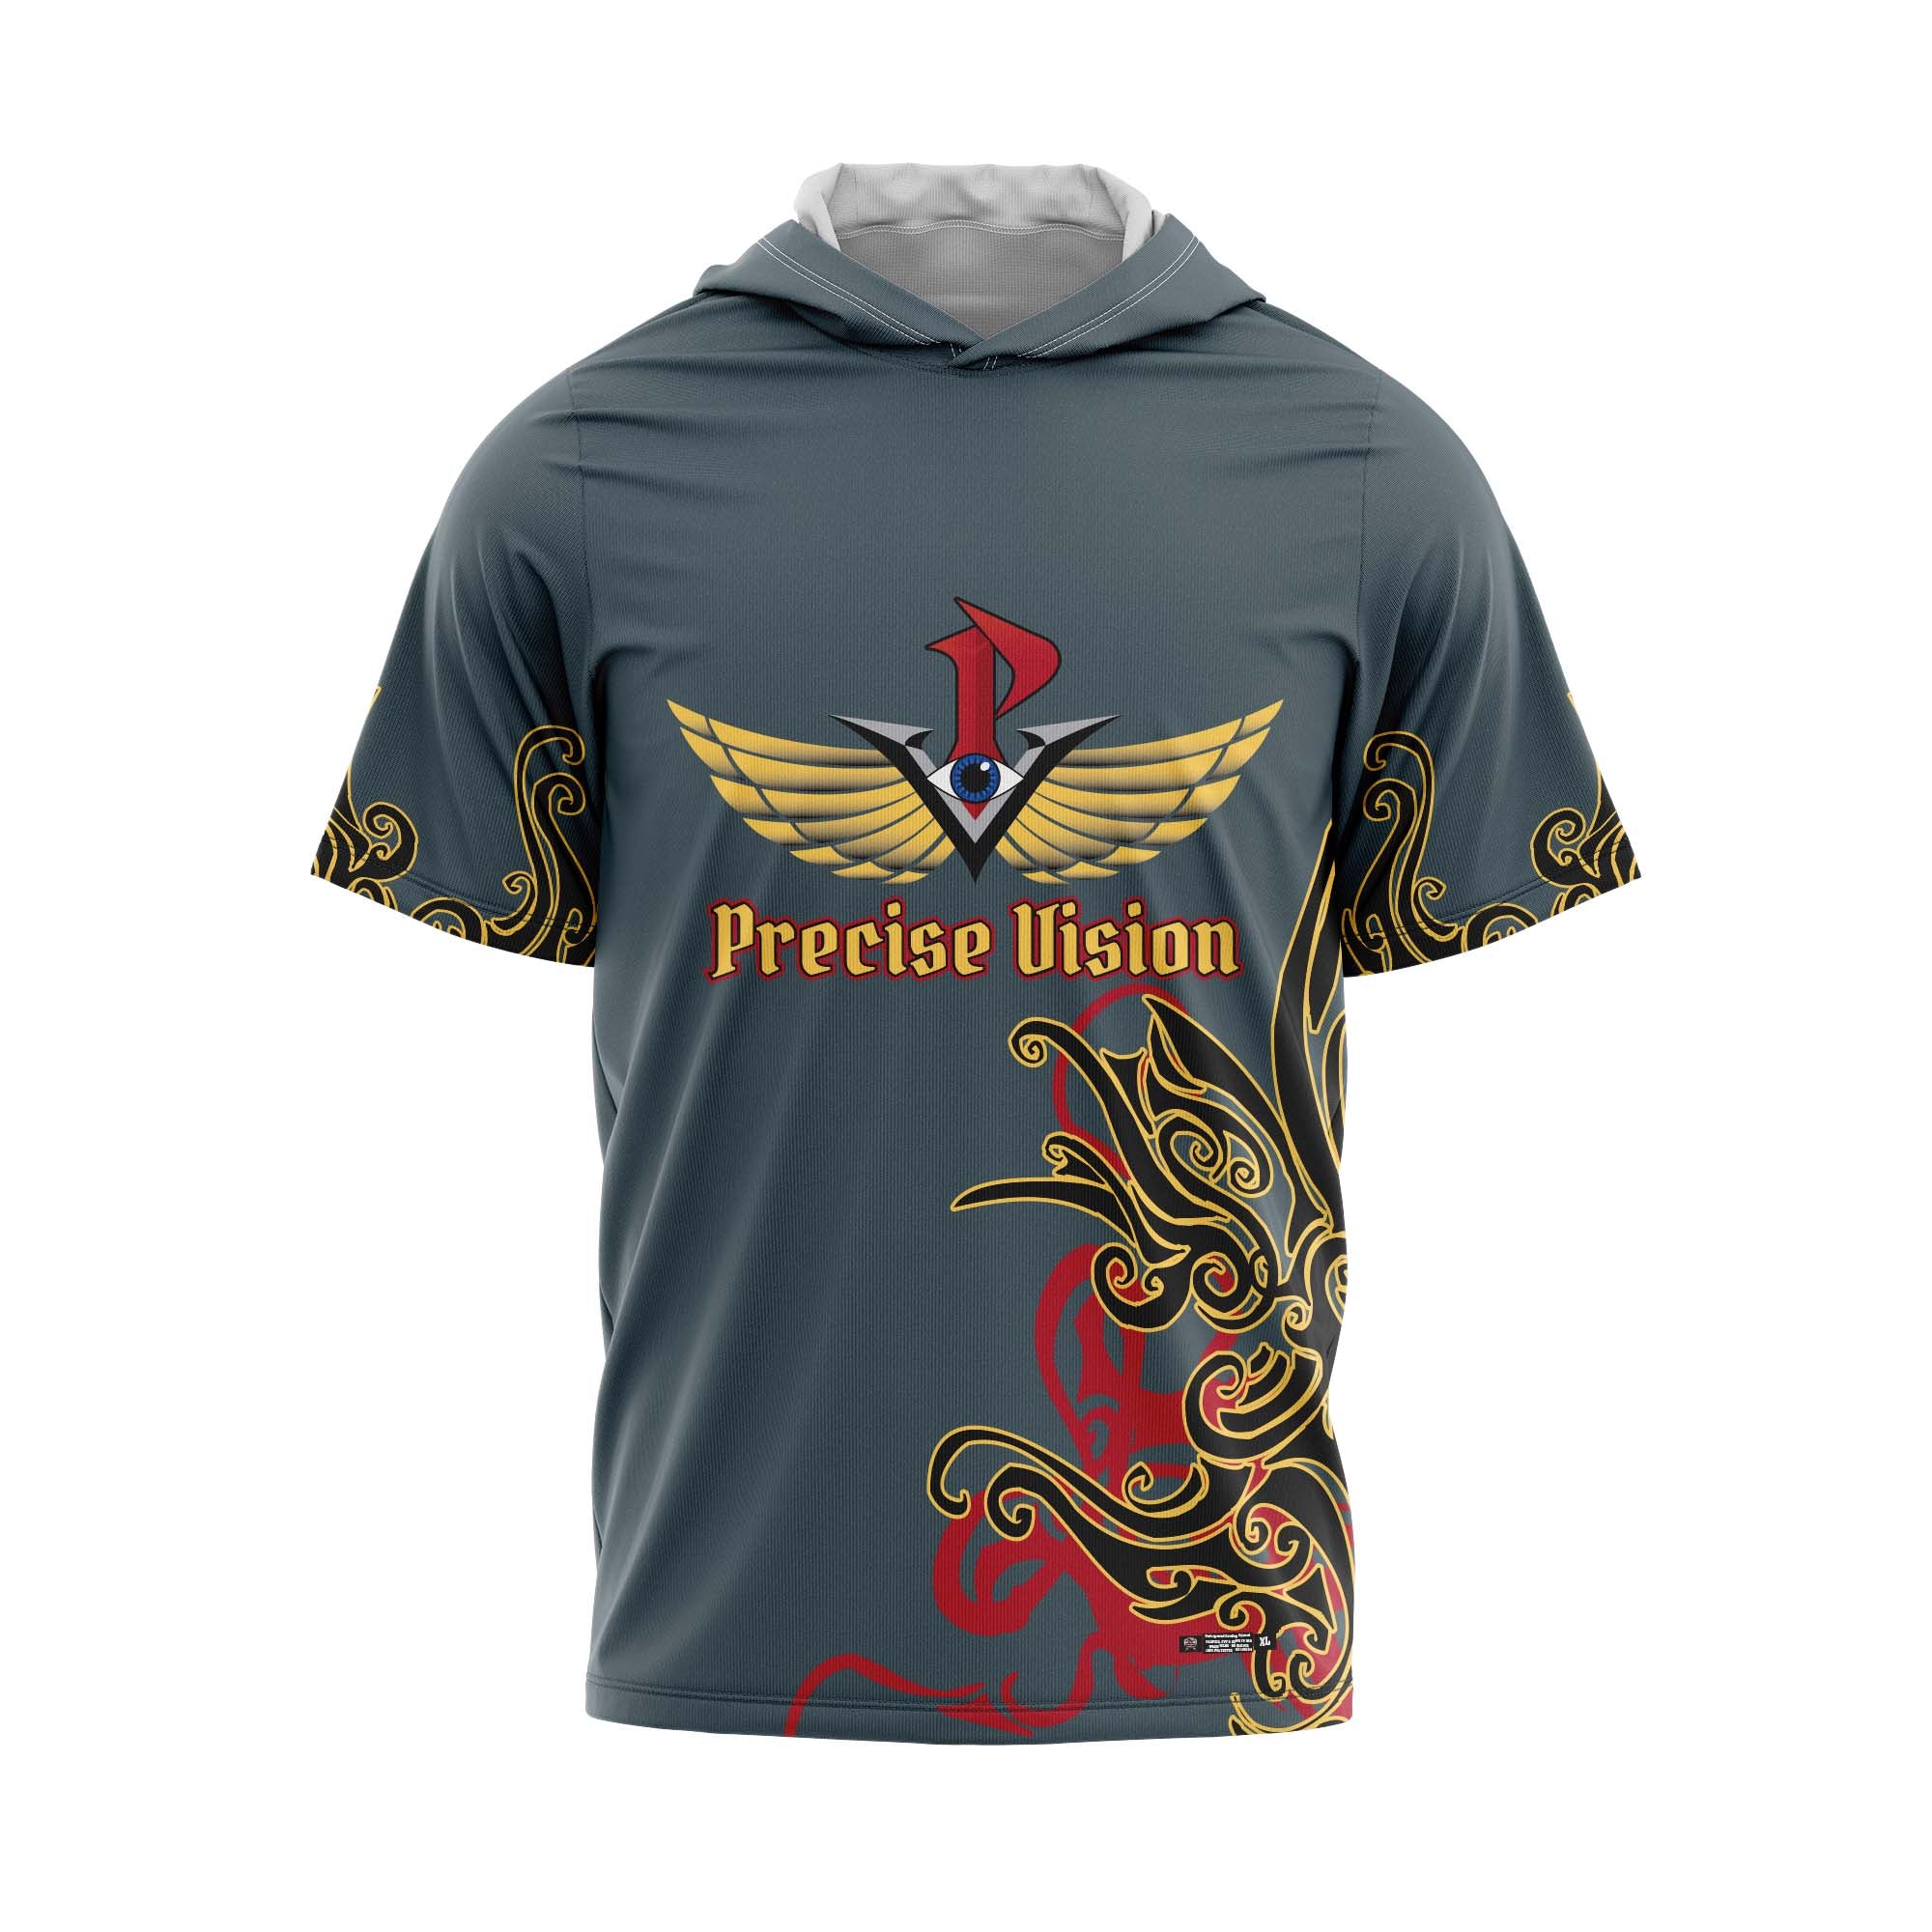 Precise Vision Grey Jersey